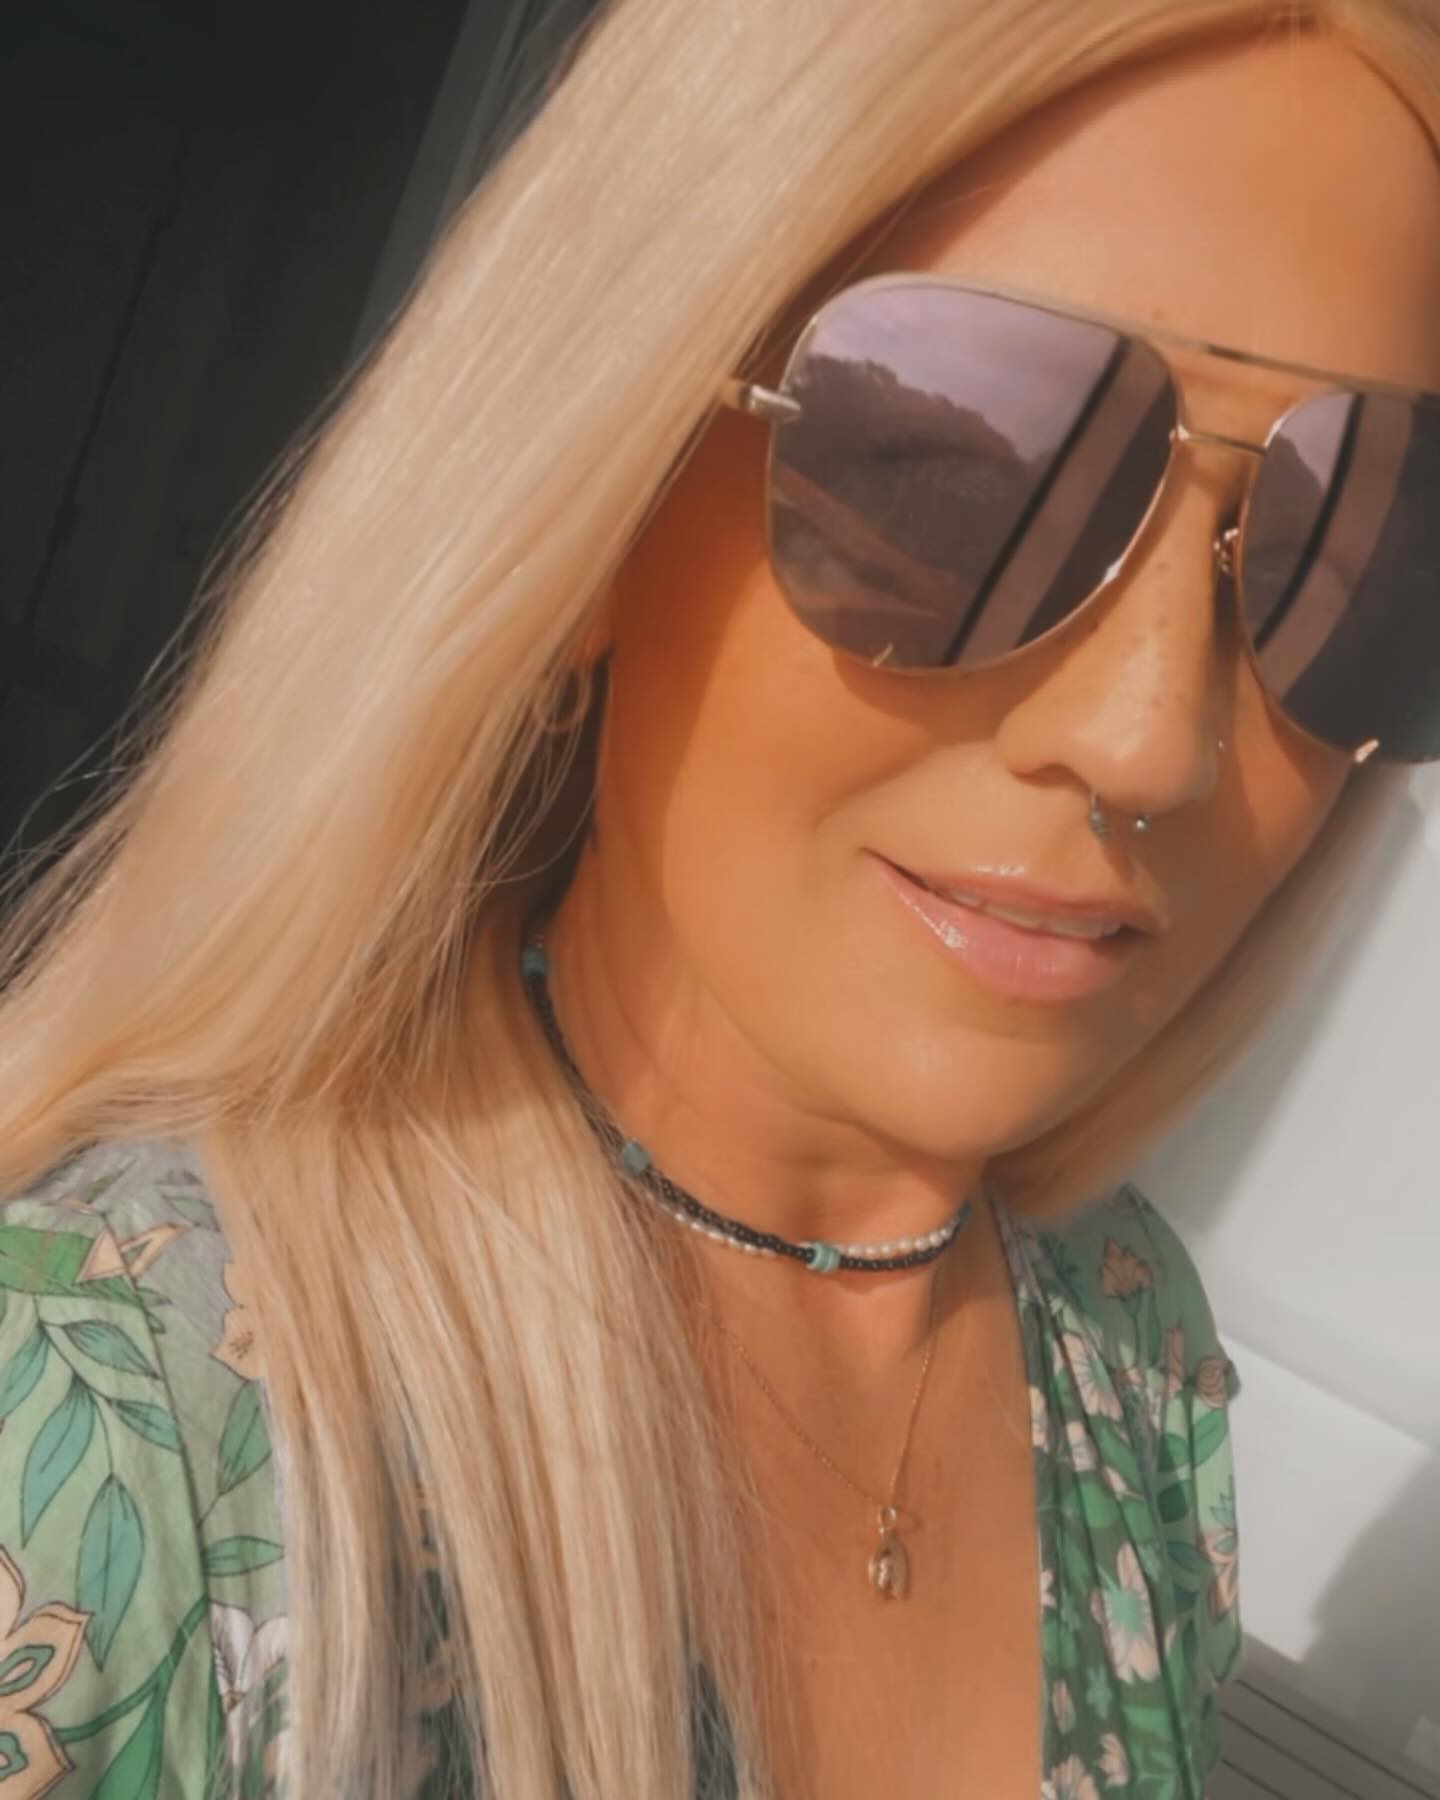 If you know me you know I love my sunnies and have a fair collection…
So I’m pretty stoked my sister Paula is now in the shades business. 
I’m in love with my pink lense aviators.
Check out their Facebook page - fox shades or website  https://foxshades.com